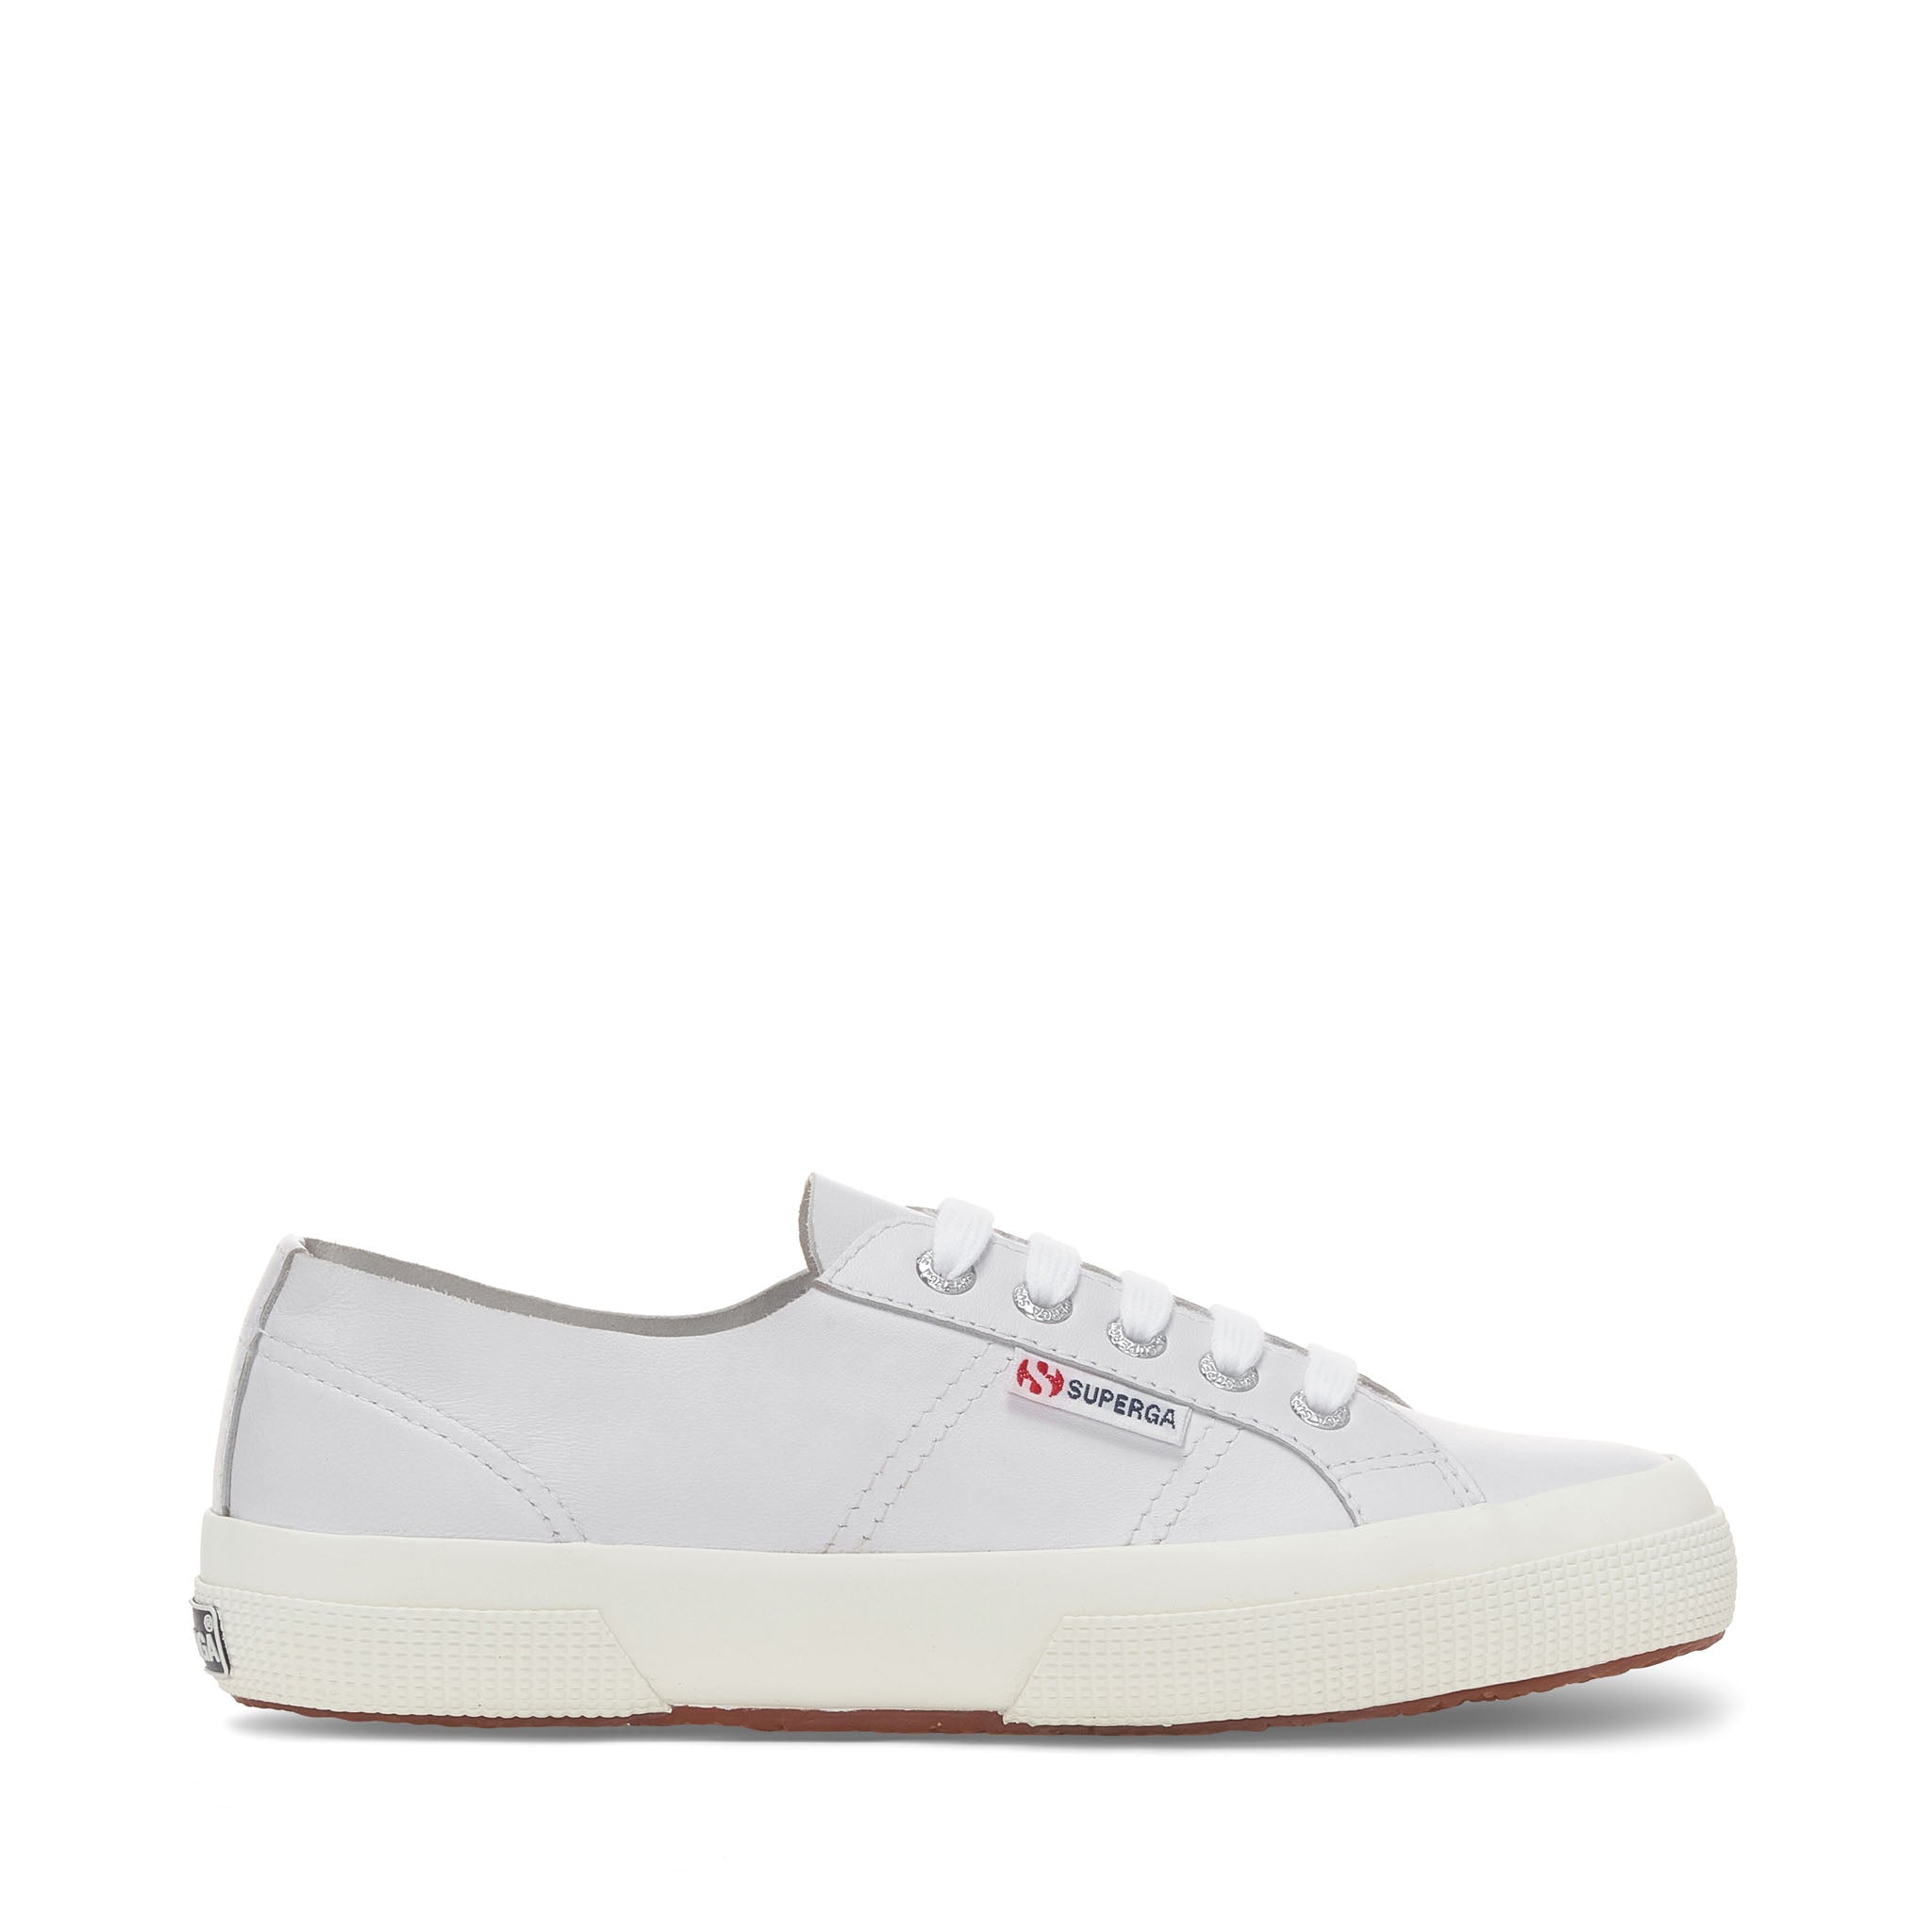 Classic White Sneakers for Women